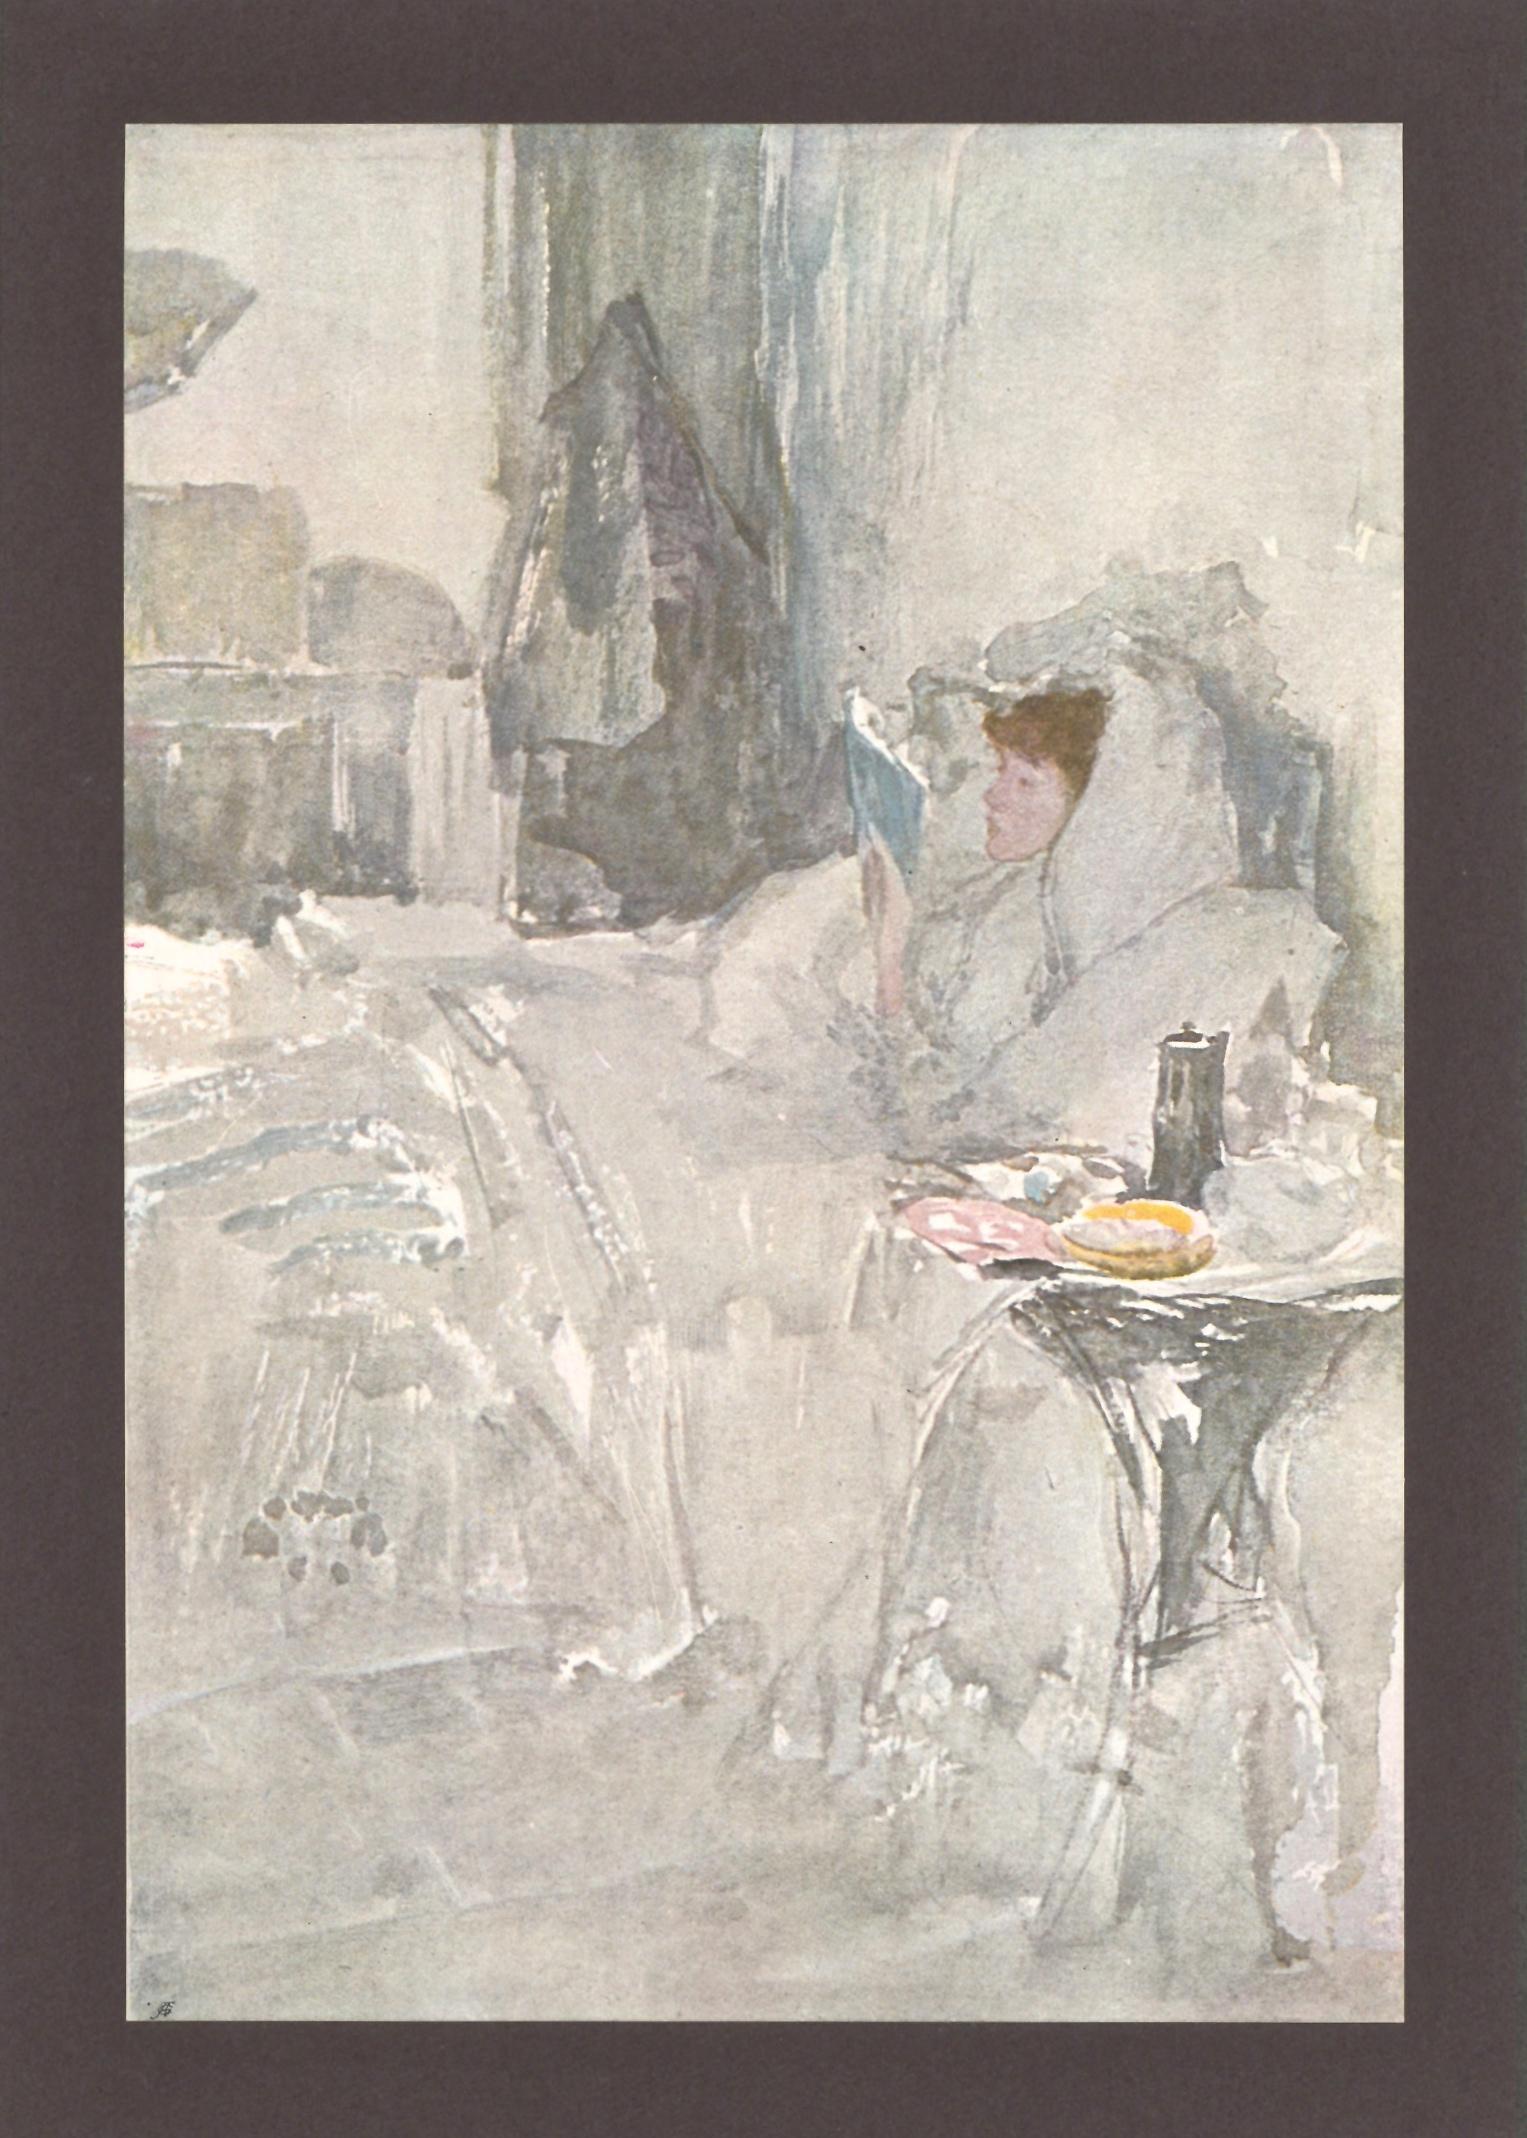 "The Convalescent" printed in 1905 - Print by (after) James Abbott McNeill Whistler